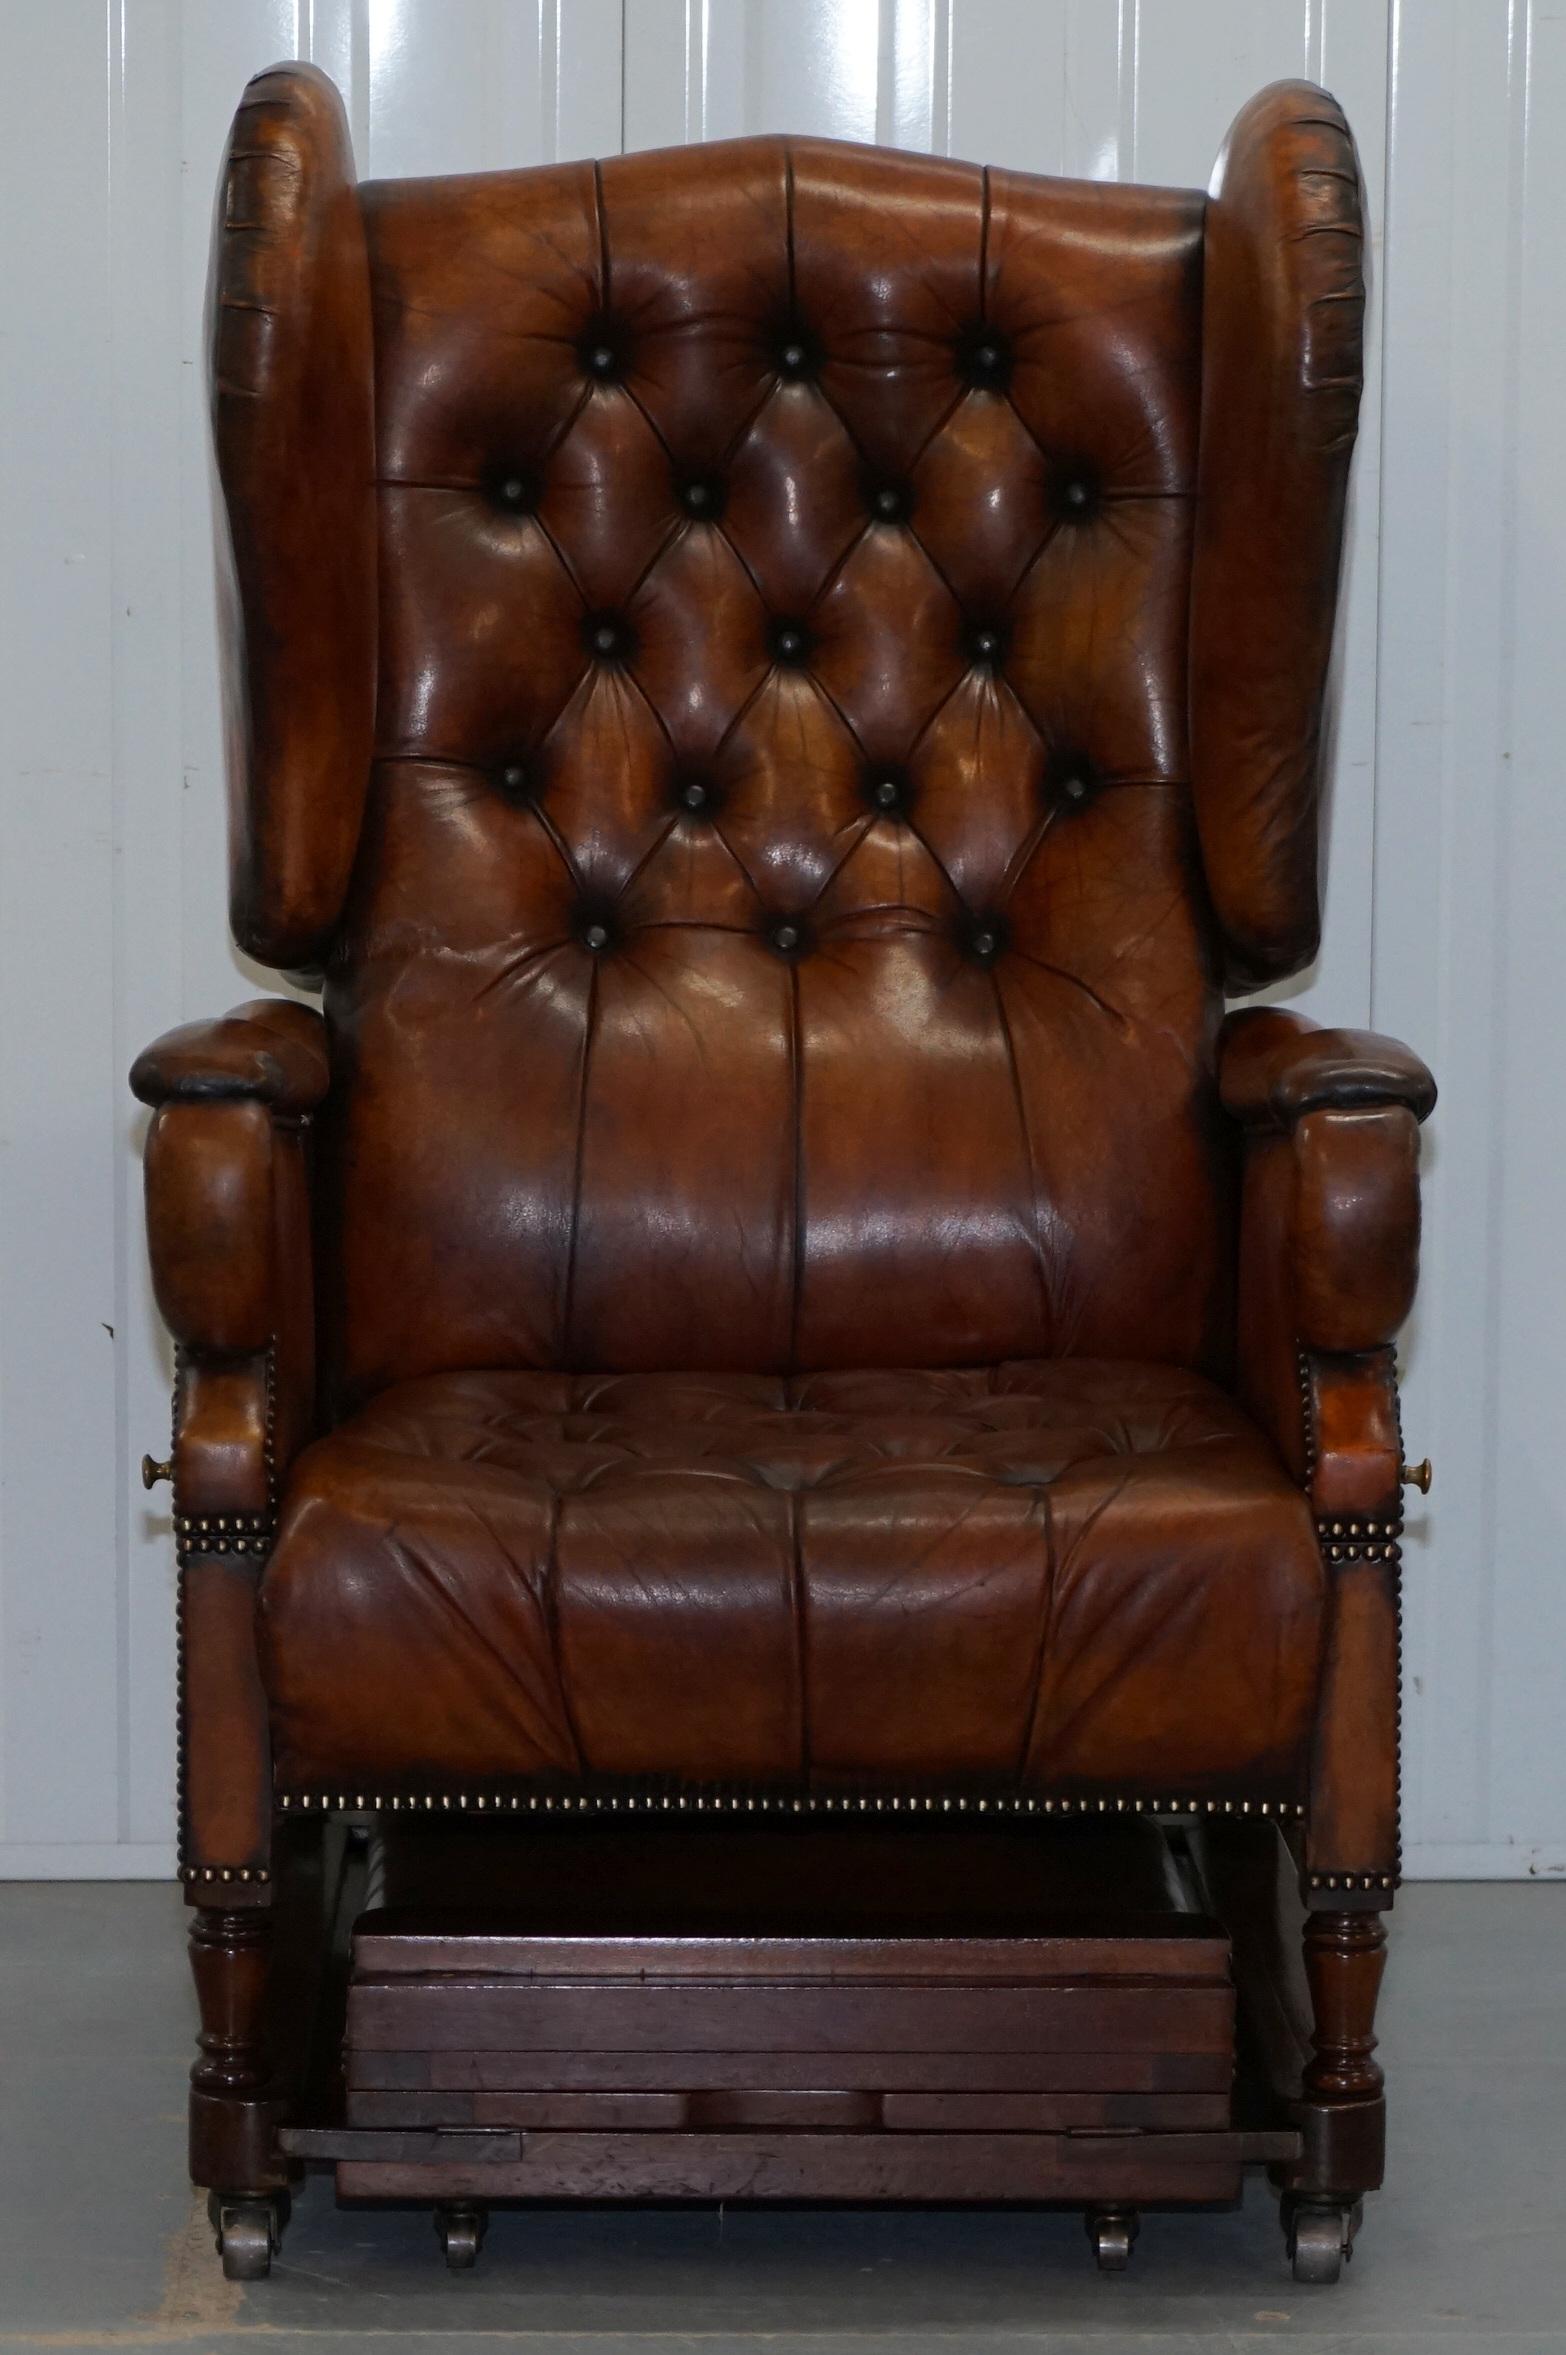 Wimbledon-Furniture

Wimbledon-Furniture is delighted to offer for sale this stunning original Victorian J Foot & Son easy armchair in fully restored condition with hand dyed brown leather

Please note the delivery fee listed is just a guide, it